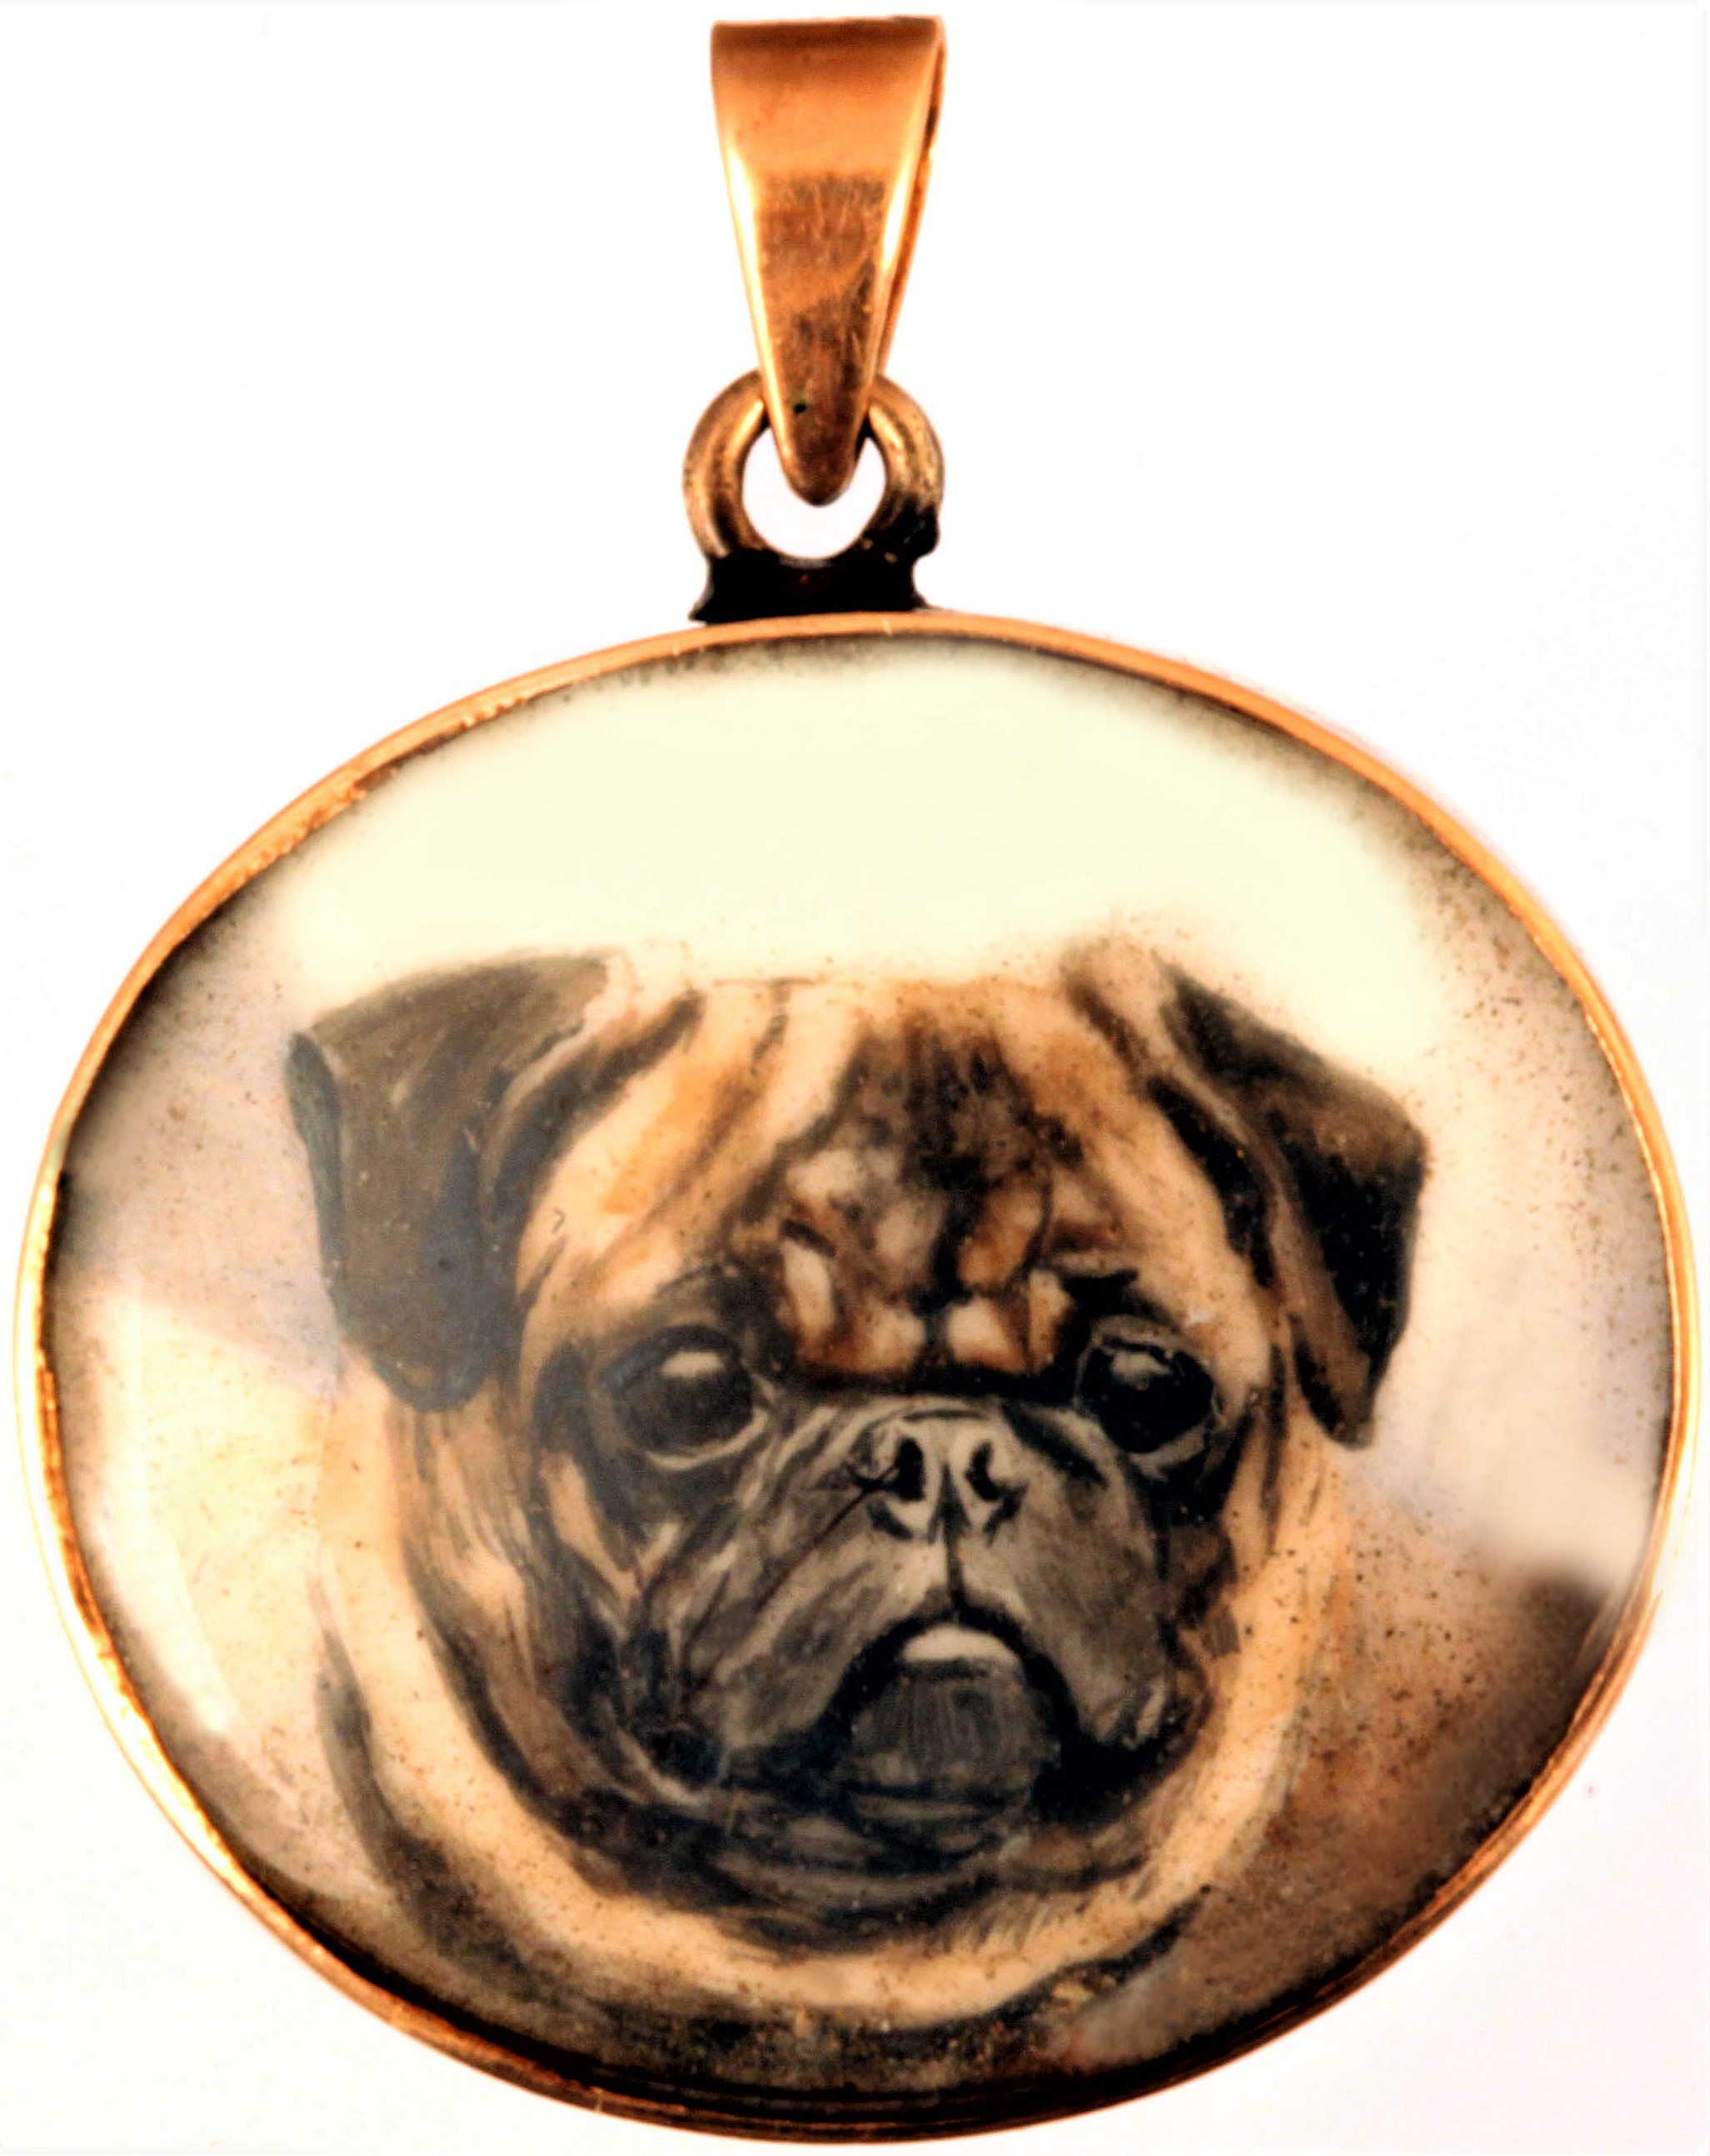 Click for larger image: Pendant of the Pug, Jack of Hearts by Reuben Ward Binks (1880-1950) - Pendant of the Pug, 